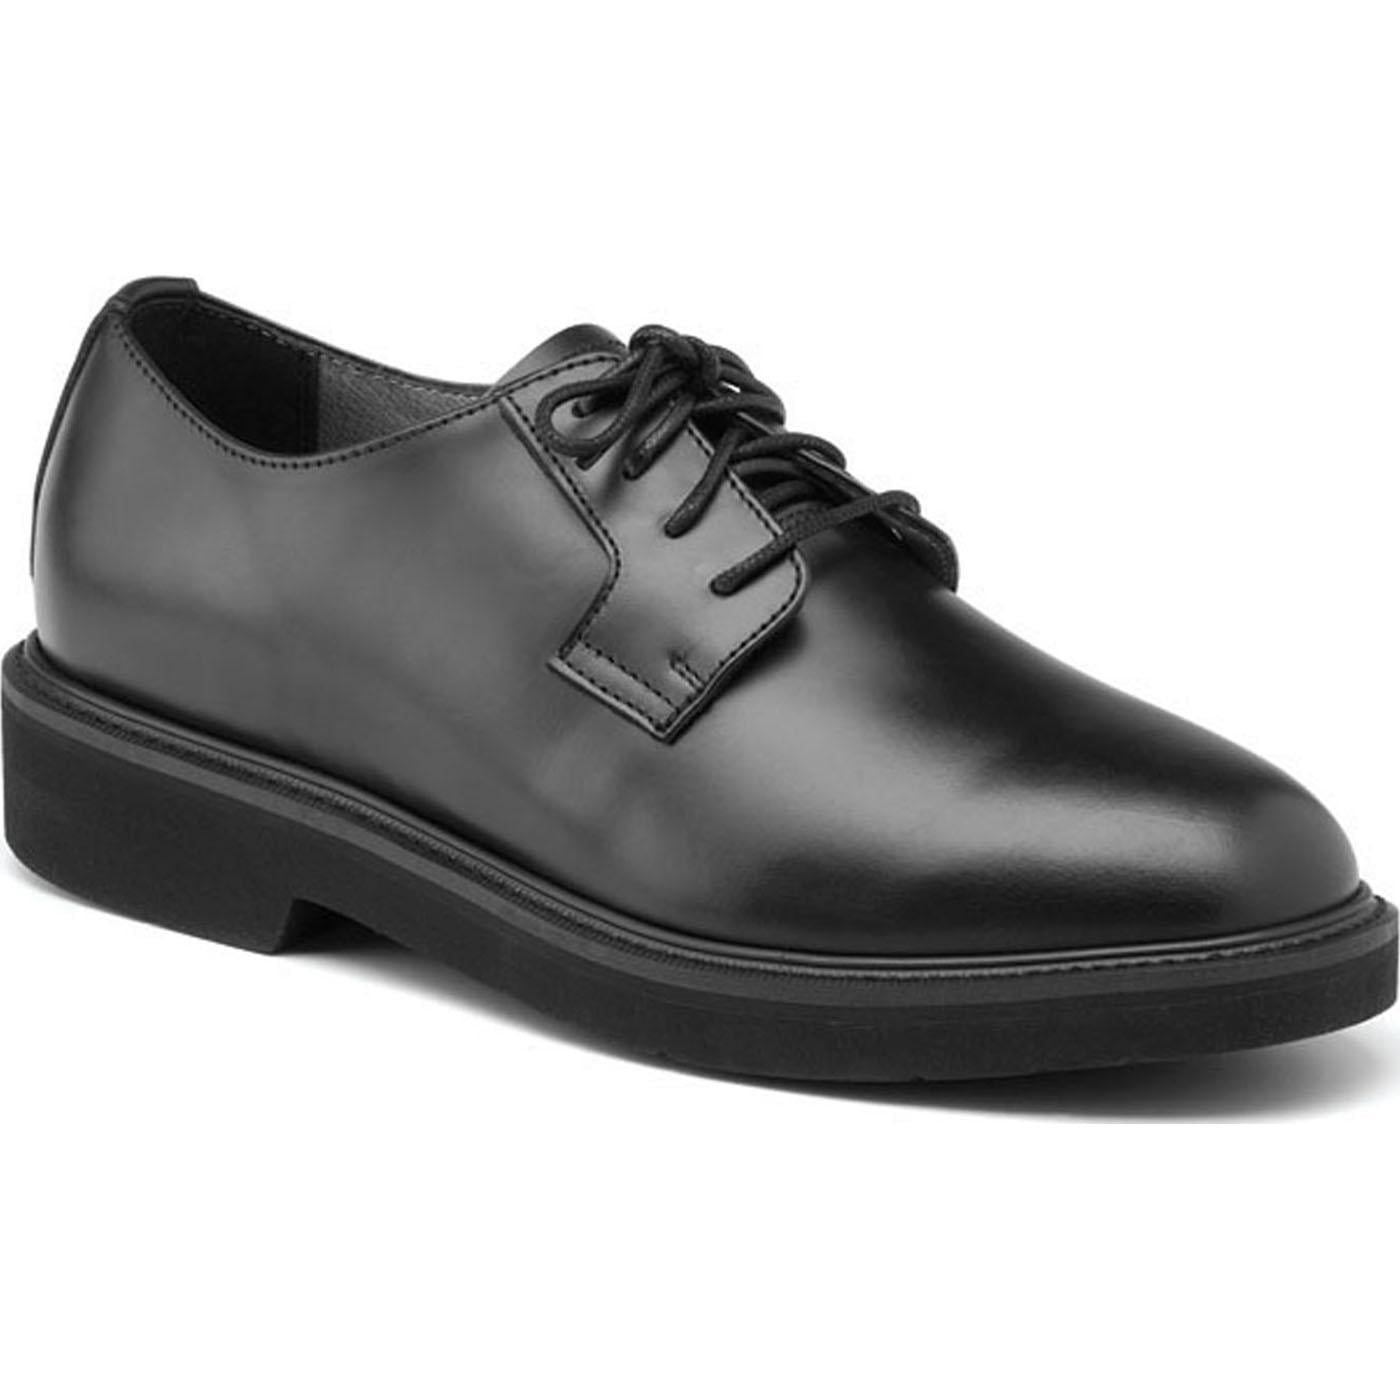 mens black leather oxford shoes